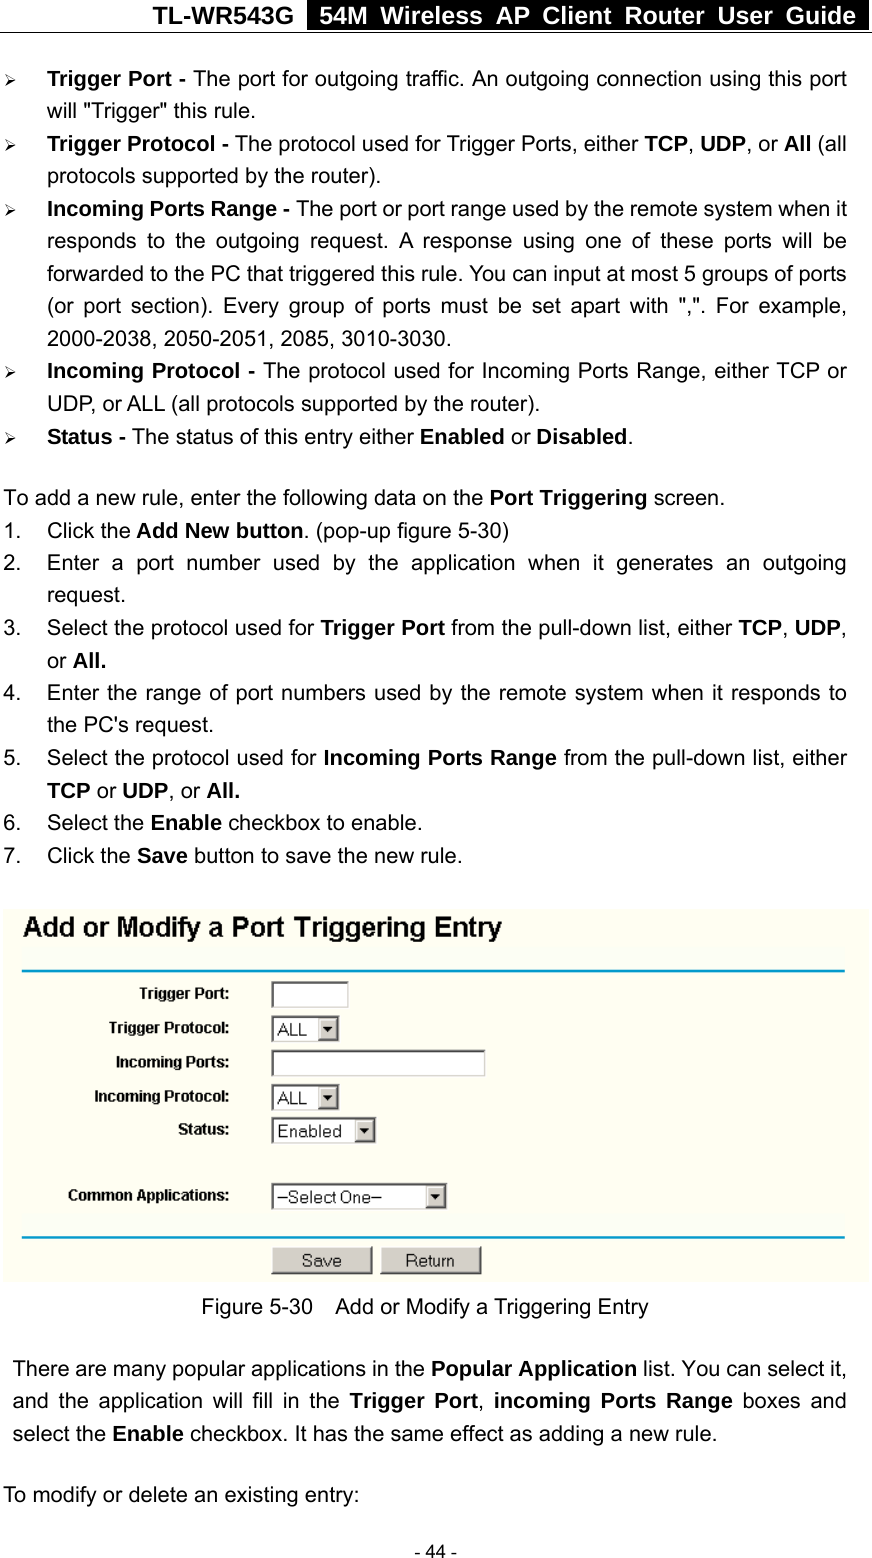 TL-WR543G   54M Wireless AP Client Router User Guide  ¾ Trigger Port - The port for outgoing traffic. An outgoing connection using this port will &quot;Trigger&quot; this rule. ¾ Trigger Protocol - The protocol used for Trigger Ports, either TCP, UDP, or All (all protocols supported by the router). ¾ Incoming Ports Range - The port or port range used by the remote system when it responds to the outgoing request. A response using one of these ports will be forwarded to the PC that triggered this rule. You can input at most 5 groups of ports (or port section). Every group of ports must be set apart with &quot;,&quot;. For example, 2000-2038, 2050-2051, 2085, 3010-3030. ¾ Incoming Protocol - The protocol used for Incoming Ports Range, either TCP or UDP, or ALL (all protocols supported by the router). ¾ Status - The status of this entry either Enabled or Disabled. To add a new rule, enter the following data on the Port Triggering screen.   1. Click the Add New button. (pop-up figure 5-30) 2.  Enter a port number used by the application when it generates an outgoing request.   3.  Select the protocol used for Trigger Port from the pull-down list, either TCP, UDP, or All. 4.  Enter the range of port numbers used by the remote system when it responds to the PC&apos;s request. 5.  Select the protocol used for Incoming Ports Range from the pull-down list, either TCP or UDP, or All. 6. Select the Enable checkbox to enable.   7. Click the Save button to save the new rule.  Figure 5-30    Add or Modify a Triggering Entry There are many popular applications in the Popular Application list. You can select it, and the application will fill in the Trigger Port,  incoming Ports Range boxes and select the Enable checkbox. It has the same effect as adding a new rule. To modify or delete an existing entry:  - 44 - 